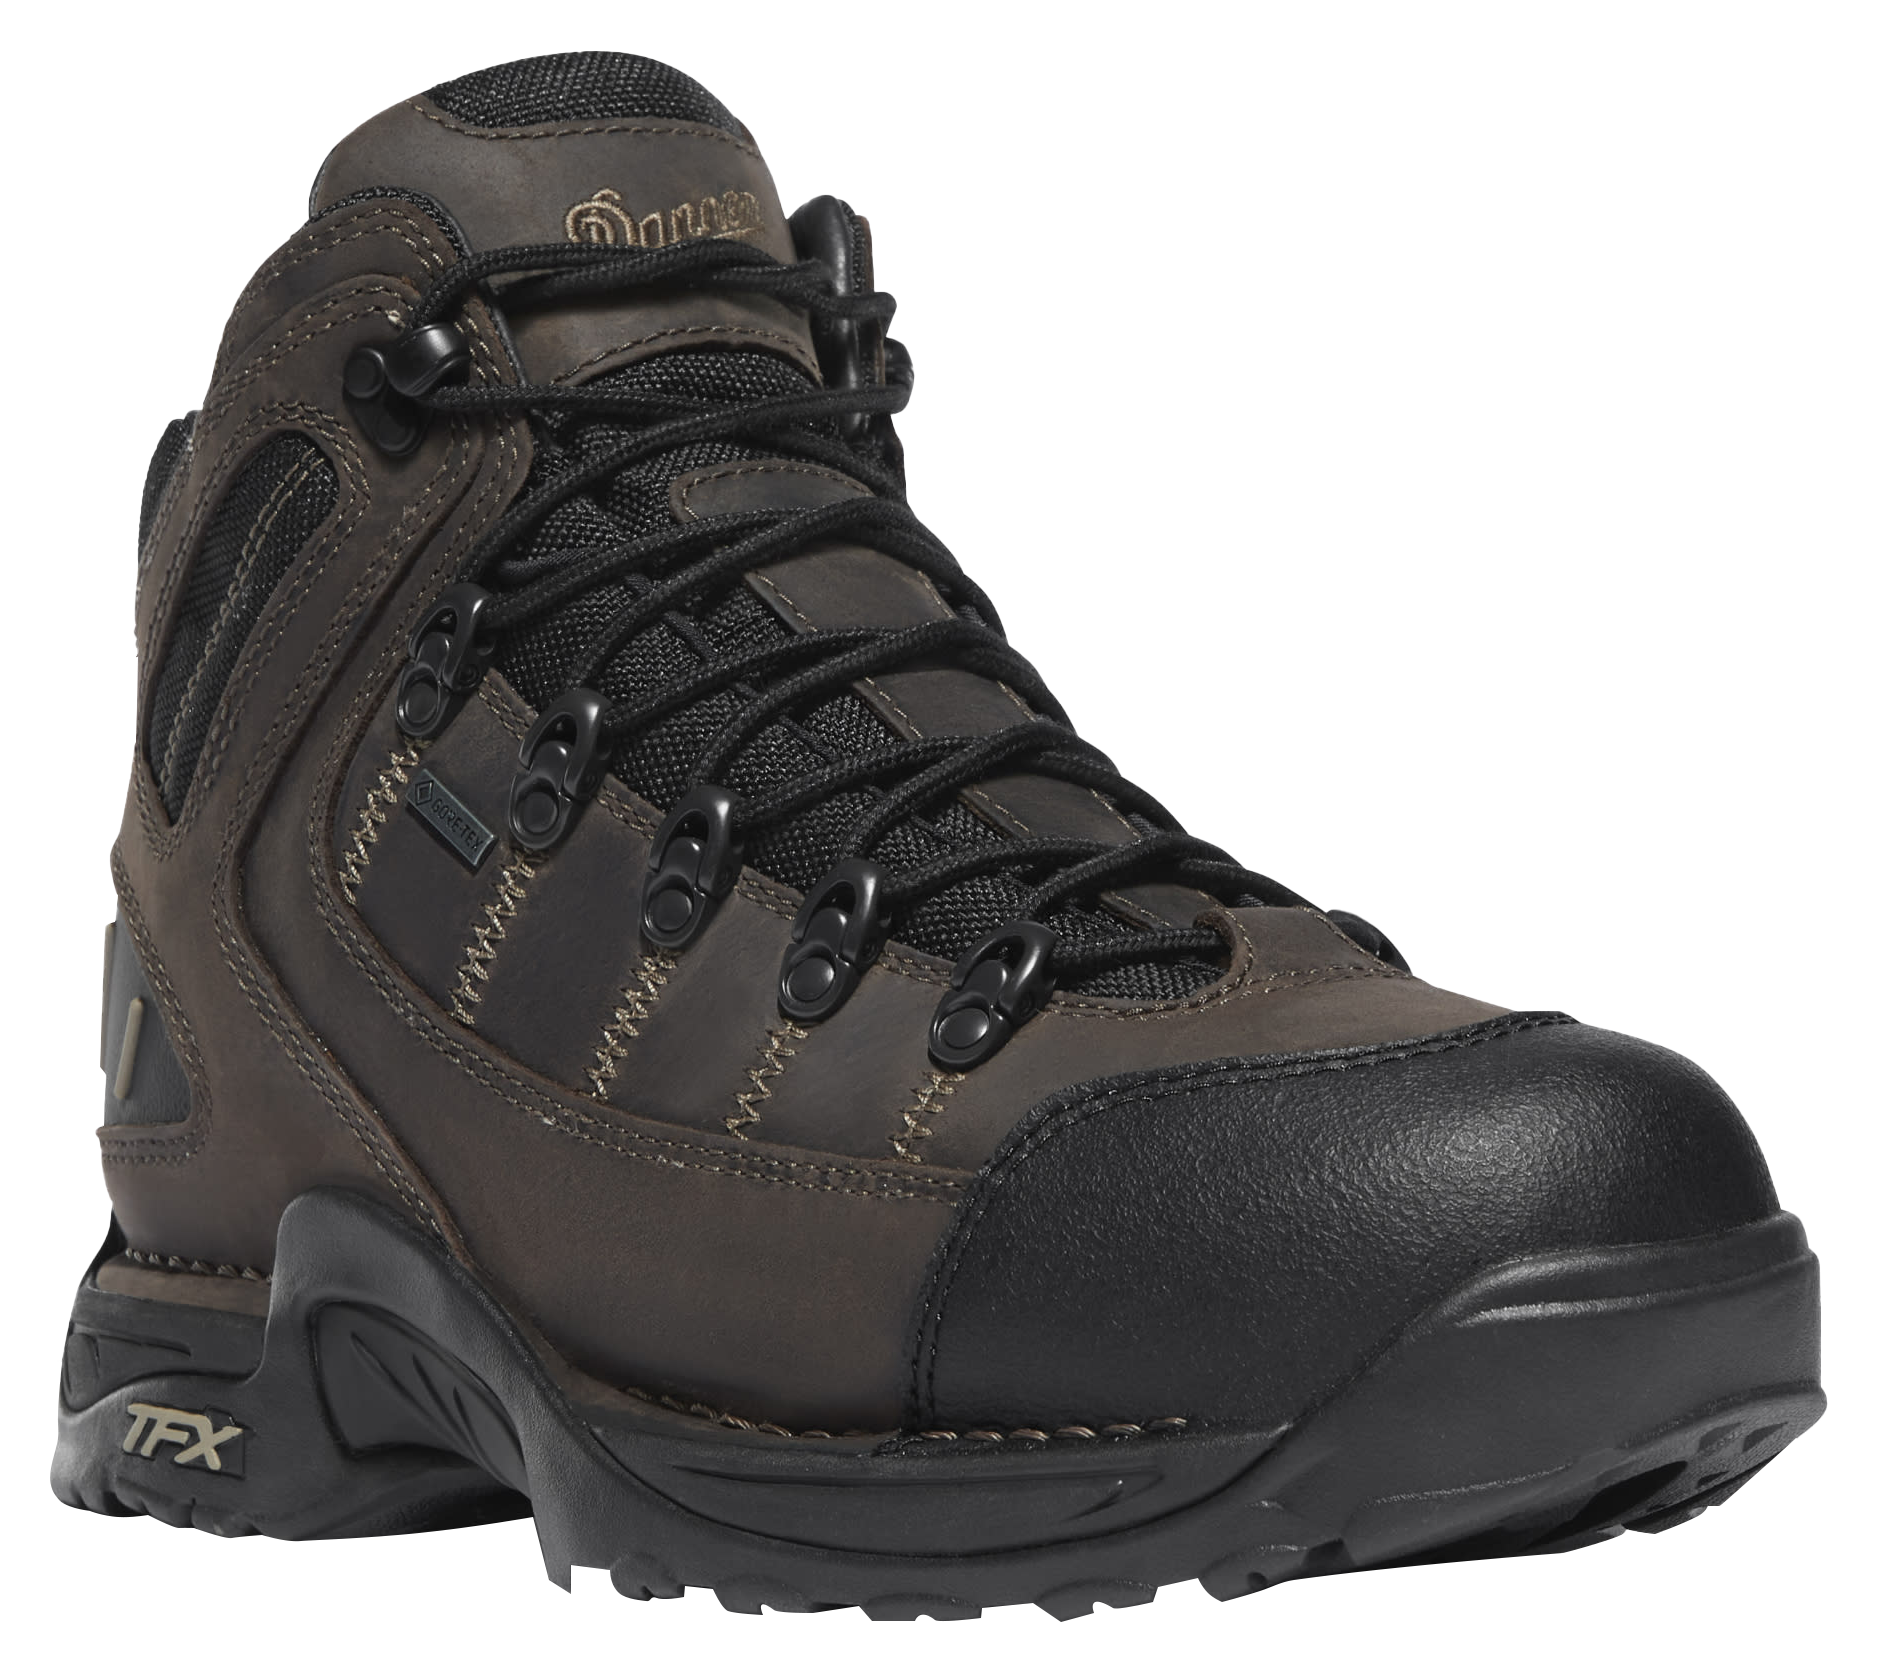 Danner 453 GORE-TEX Waterproof Hiking Boots for Men - Loam Brown/Chocolate Chip - 8.5M